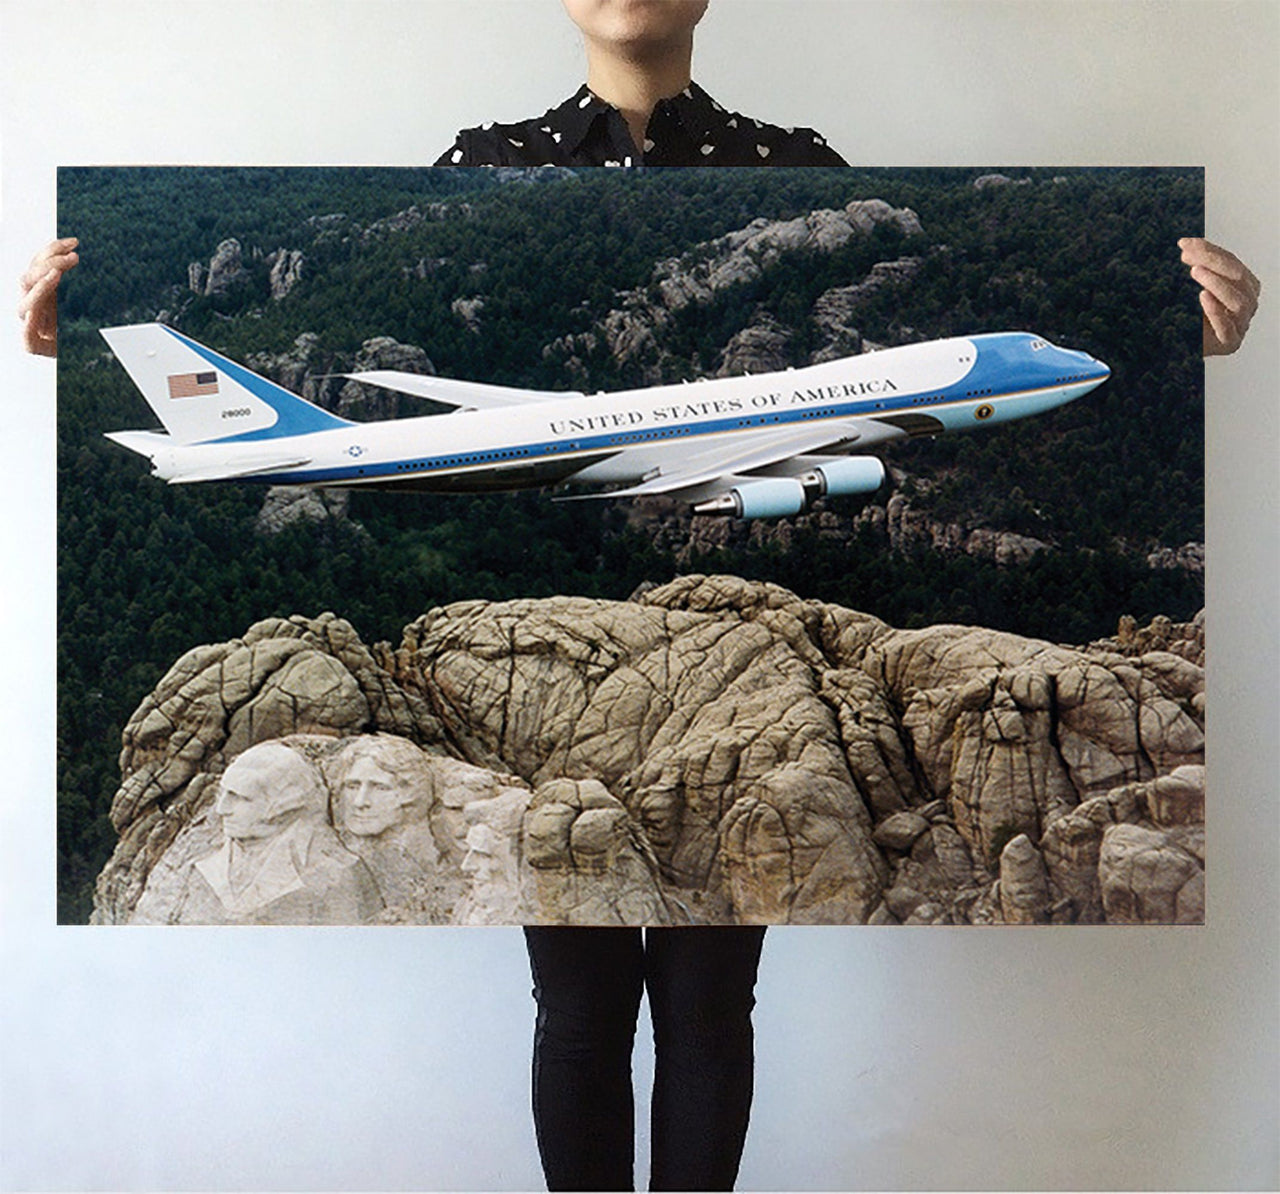 Cruising United States of America Boeing 747 Printed Posters Aviation Shop 